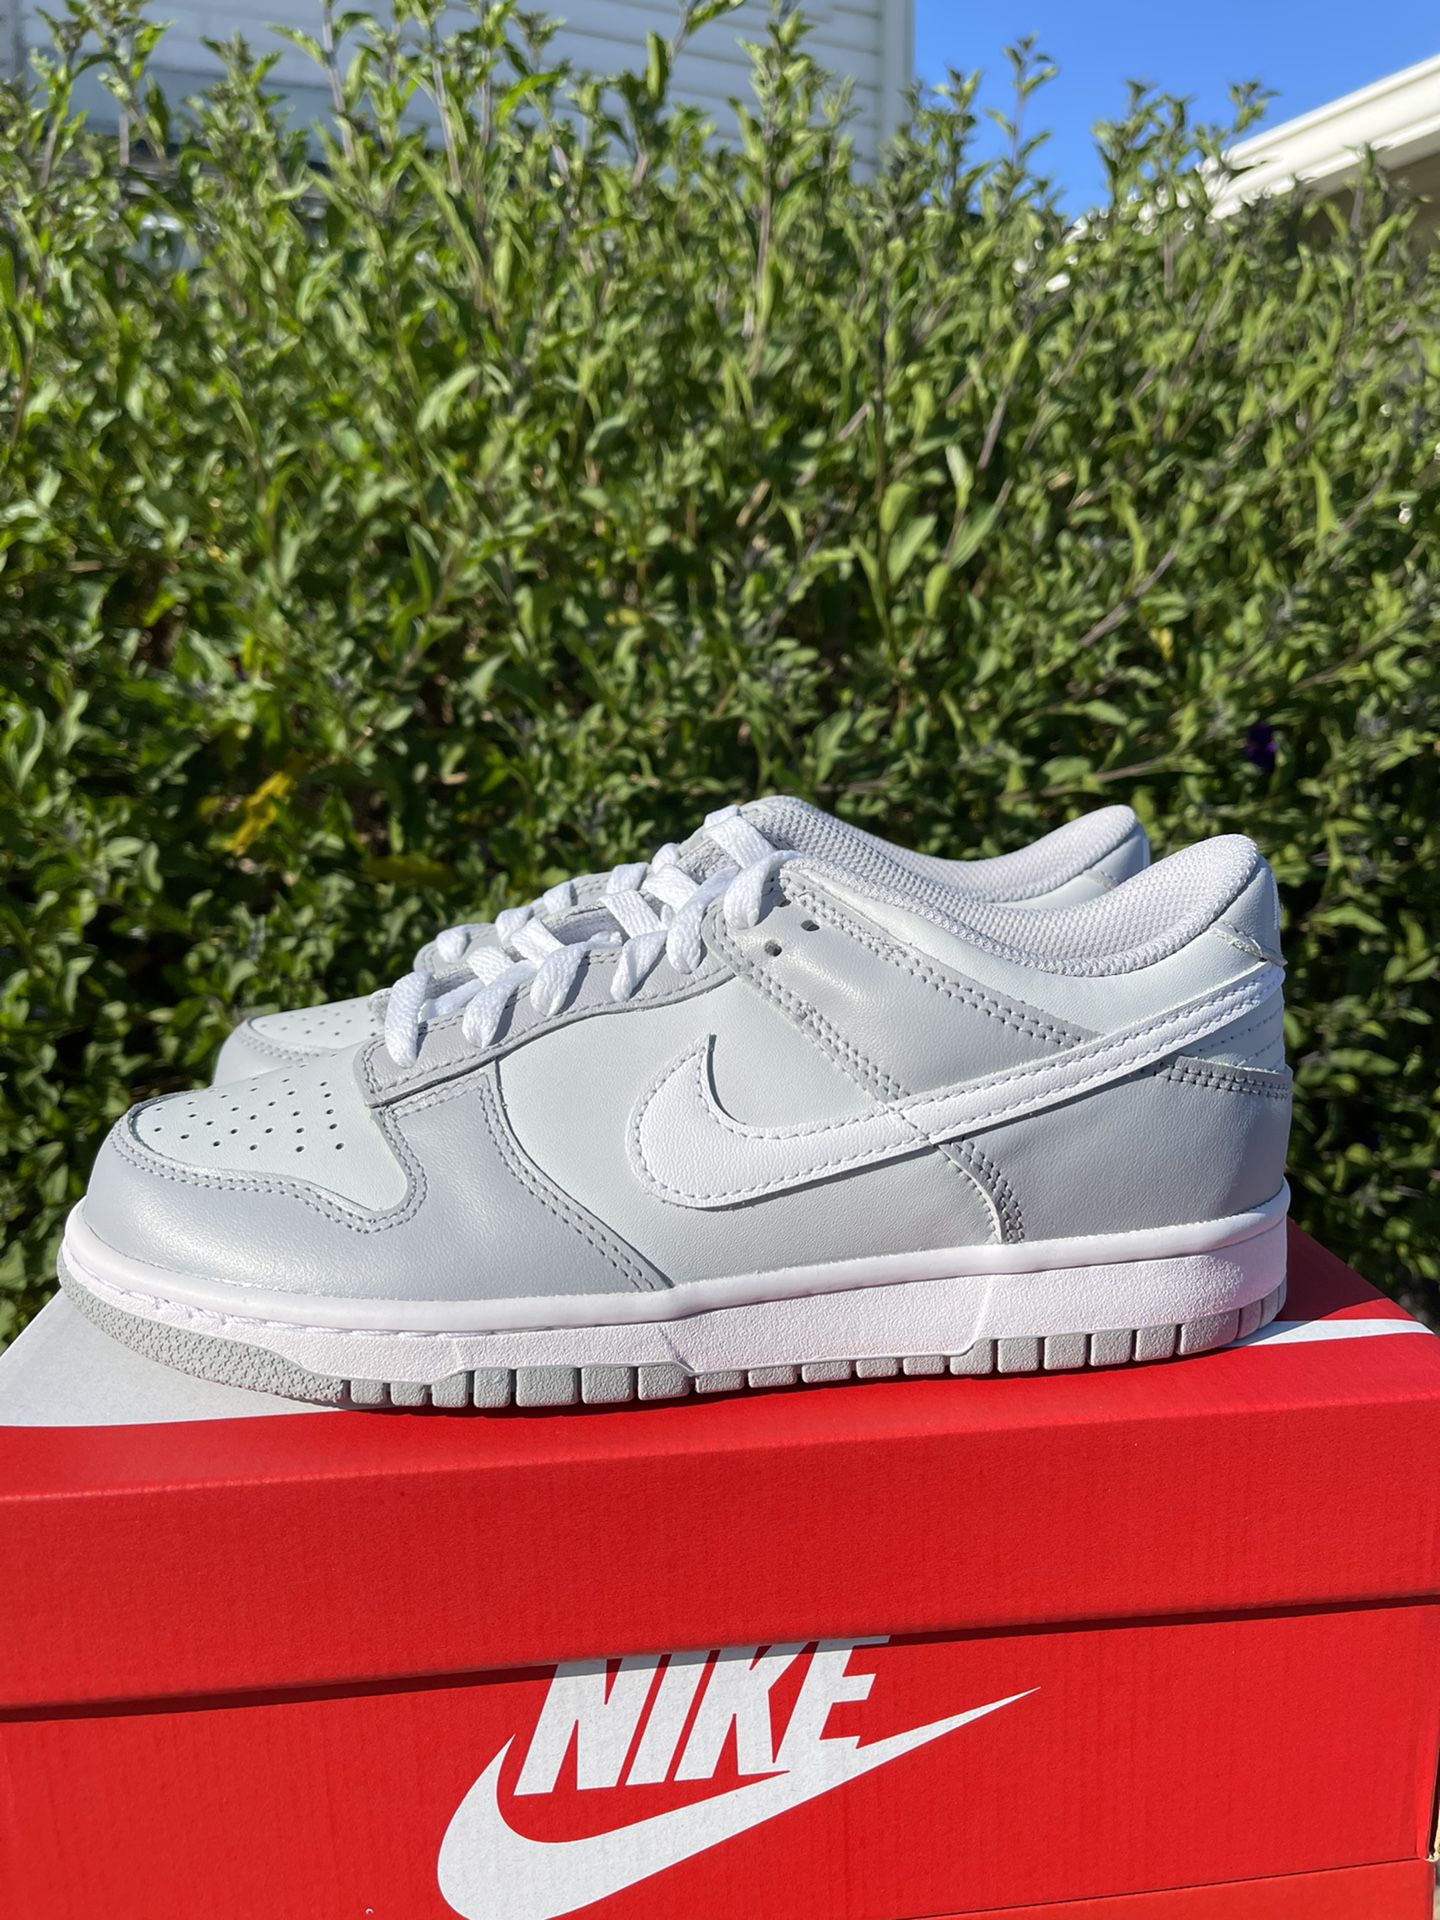 NEW Nike Dunk Low Pure Platinum Two Tone Grey DH9765-001 GS Size 6.5Y & 7Y